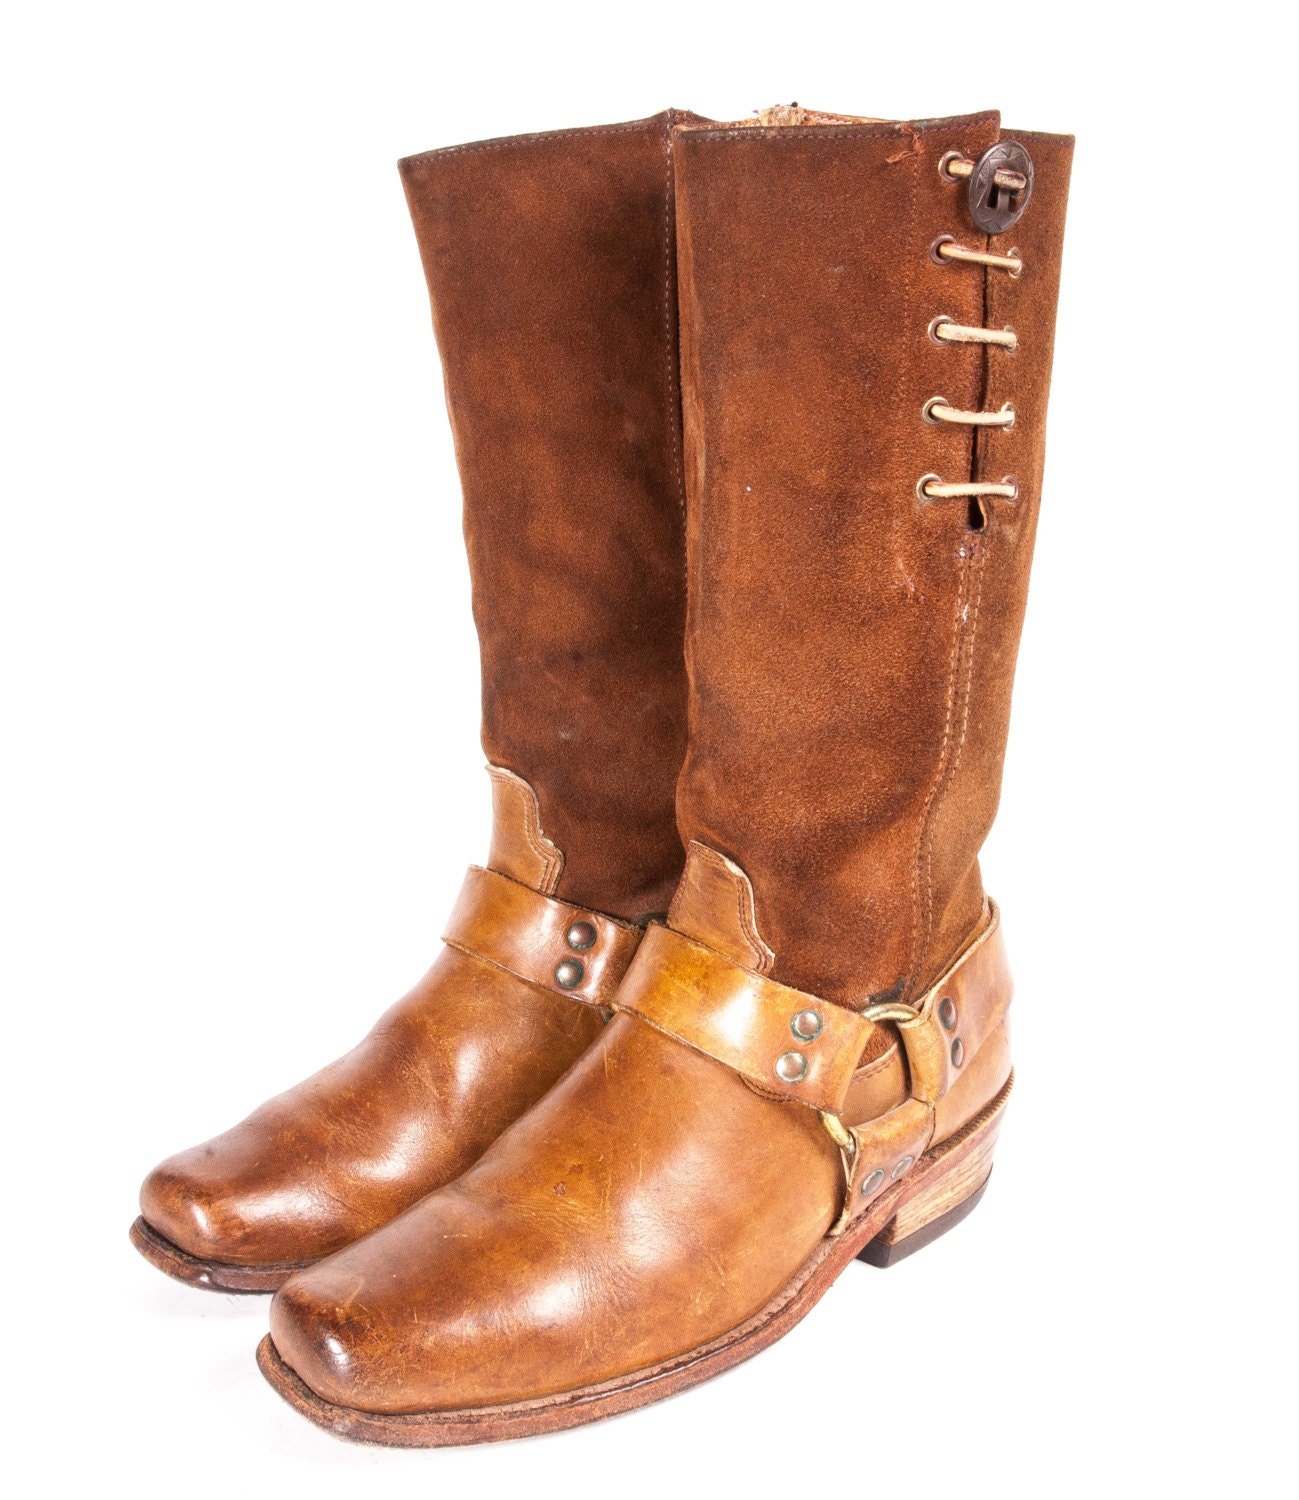 1960's Men's Harness Boots Hippie Style Size 8